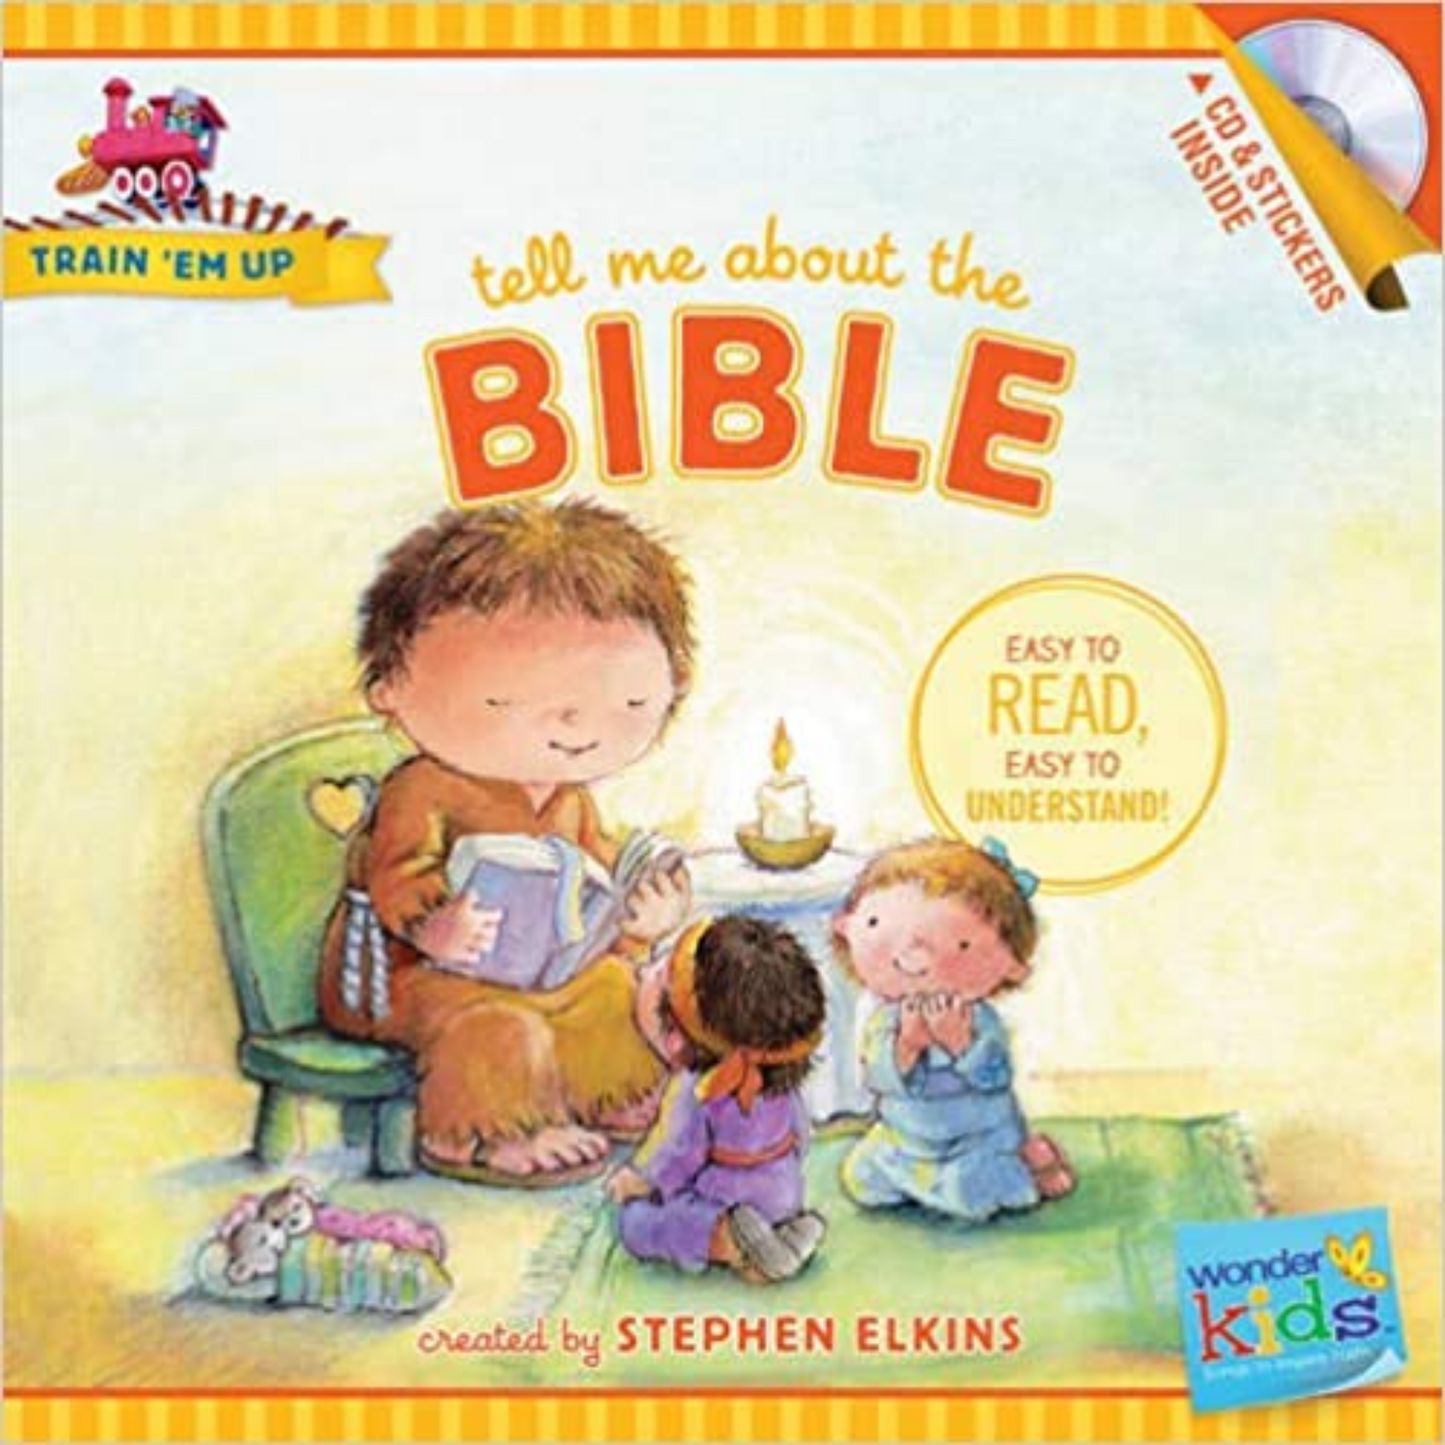 Train Em Up-Tell Me About Bible w/CD+Stickers